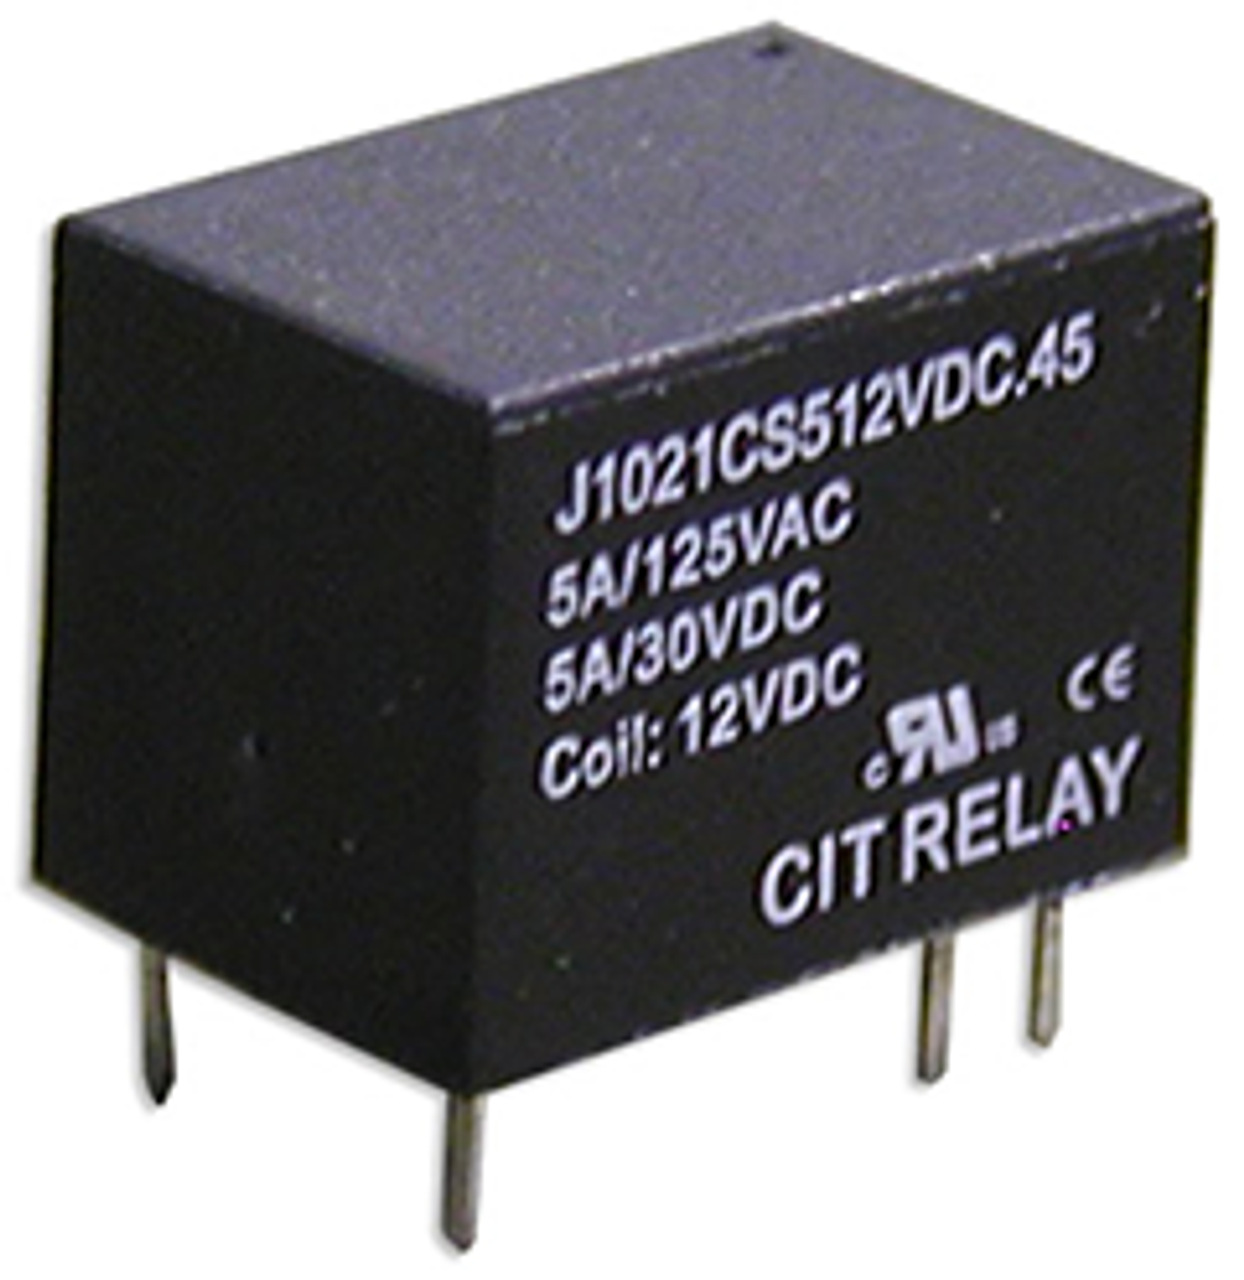 CIT Relay and Switch J1021AS3P5VDC.36 Power Relays